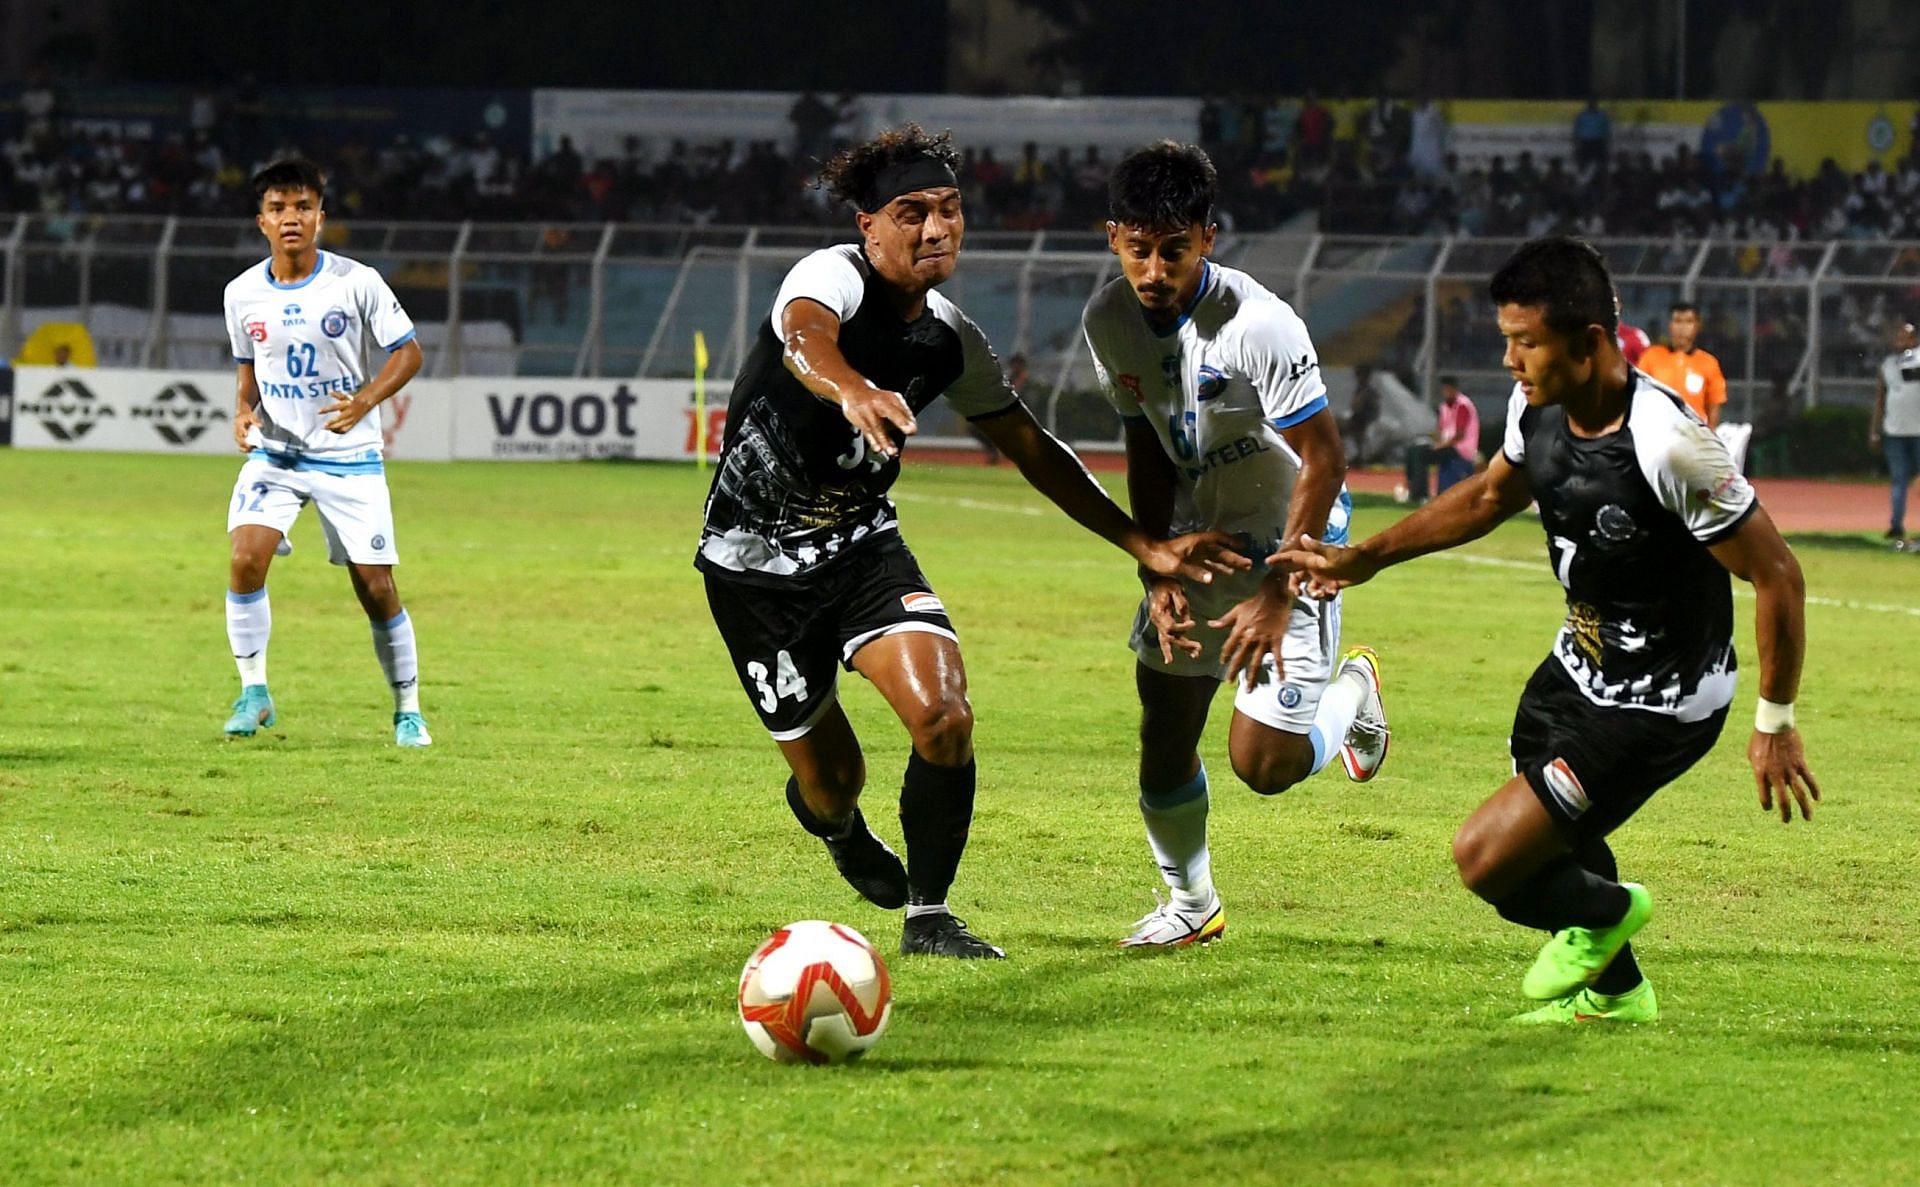 Mohammedan SC bagged a comfortable win against a young Jamshedpur FC side (Image Courtesy: Durand Cup)